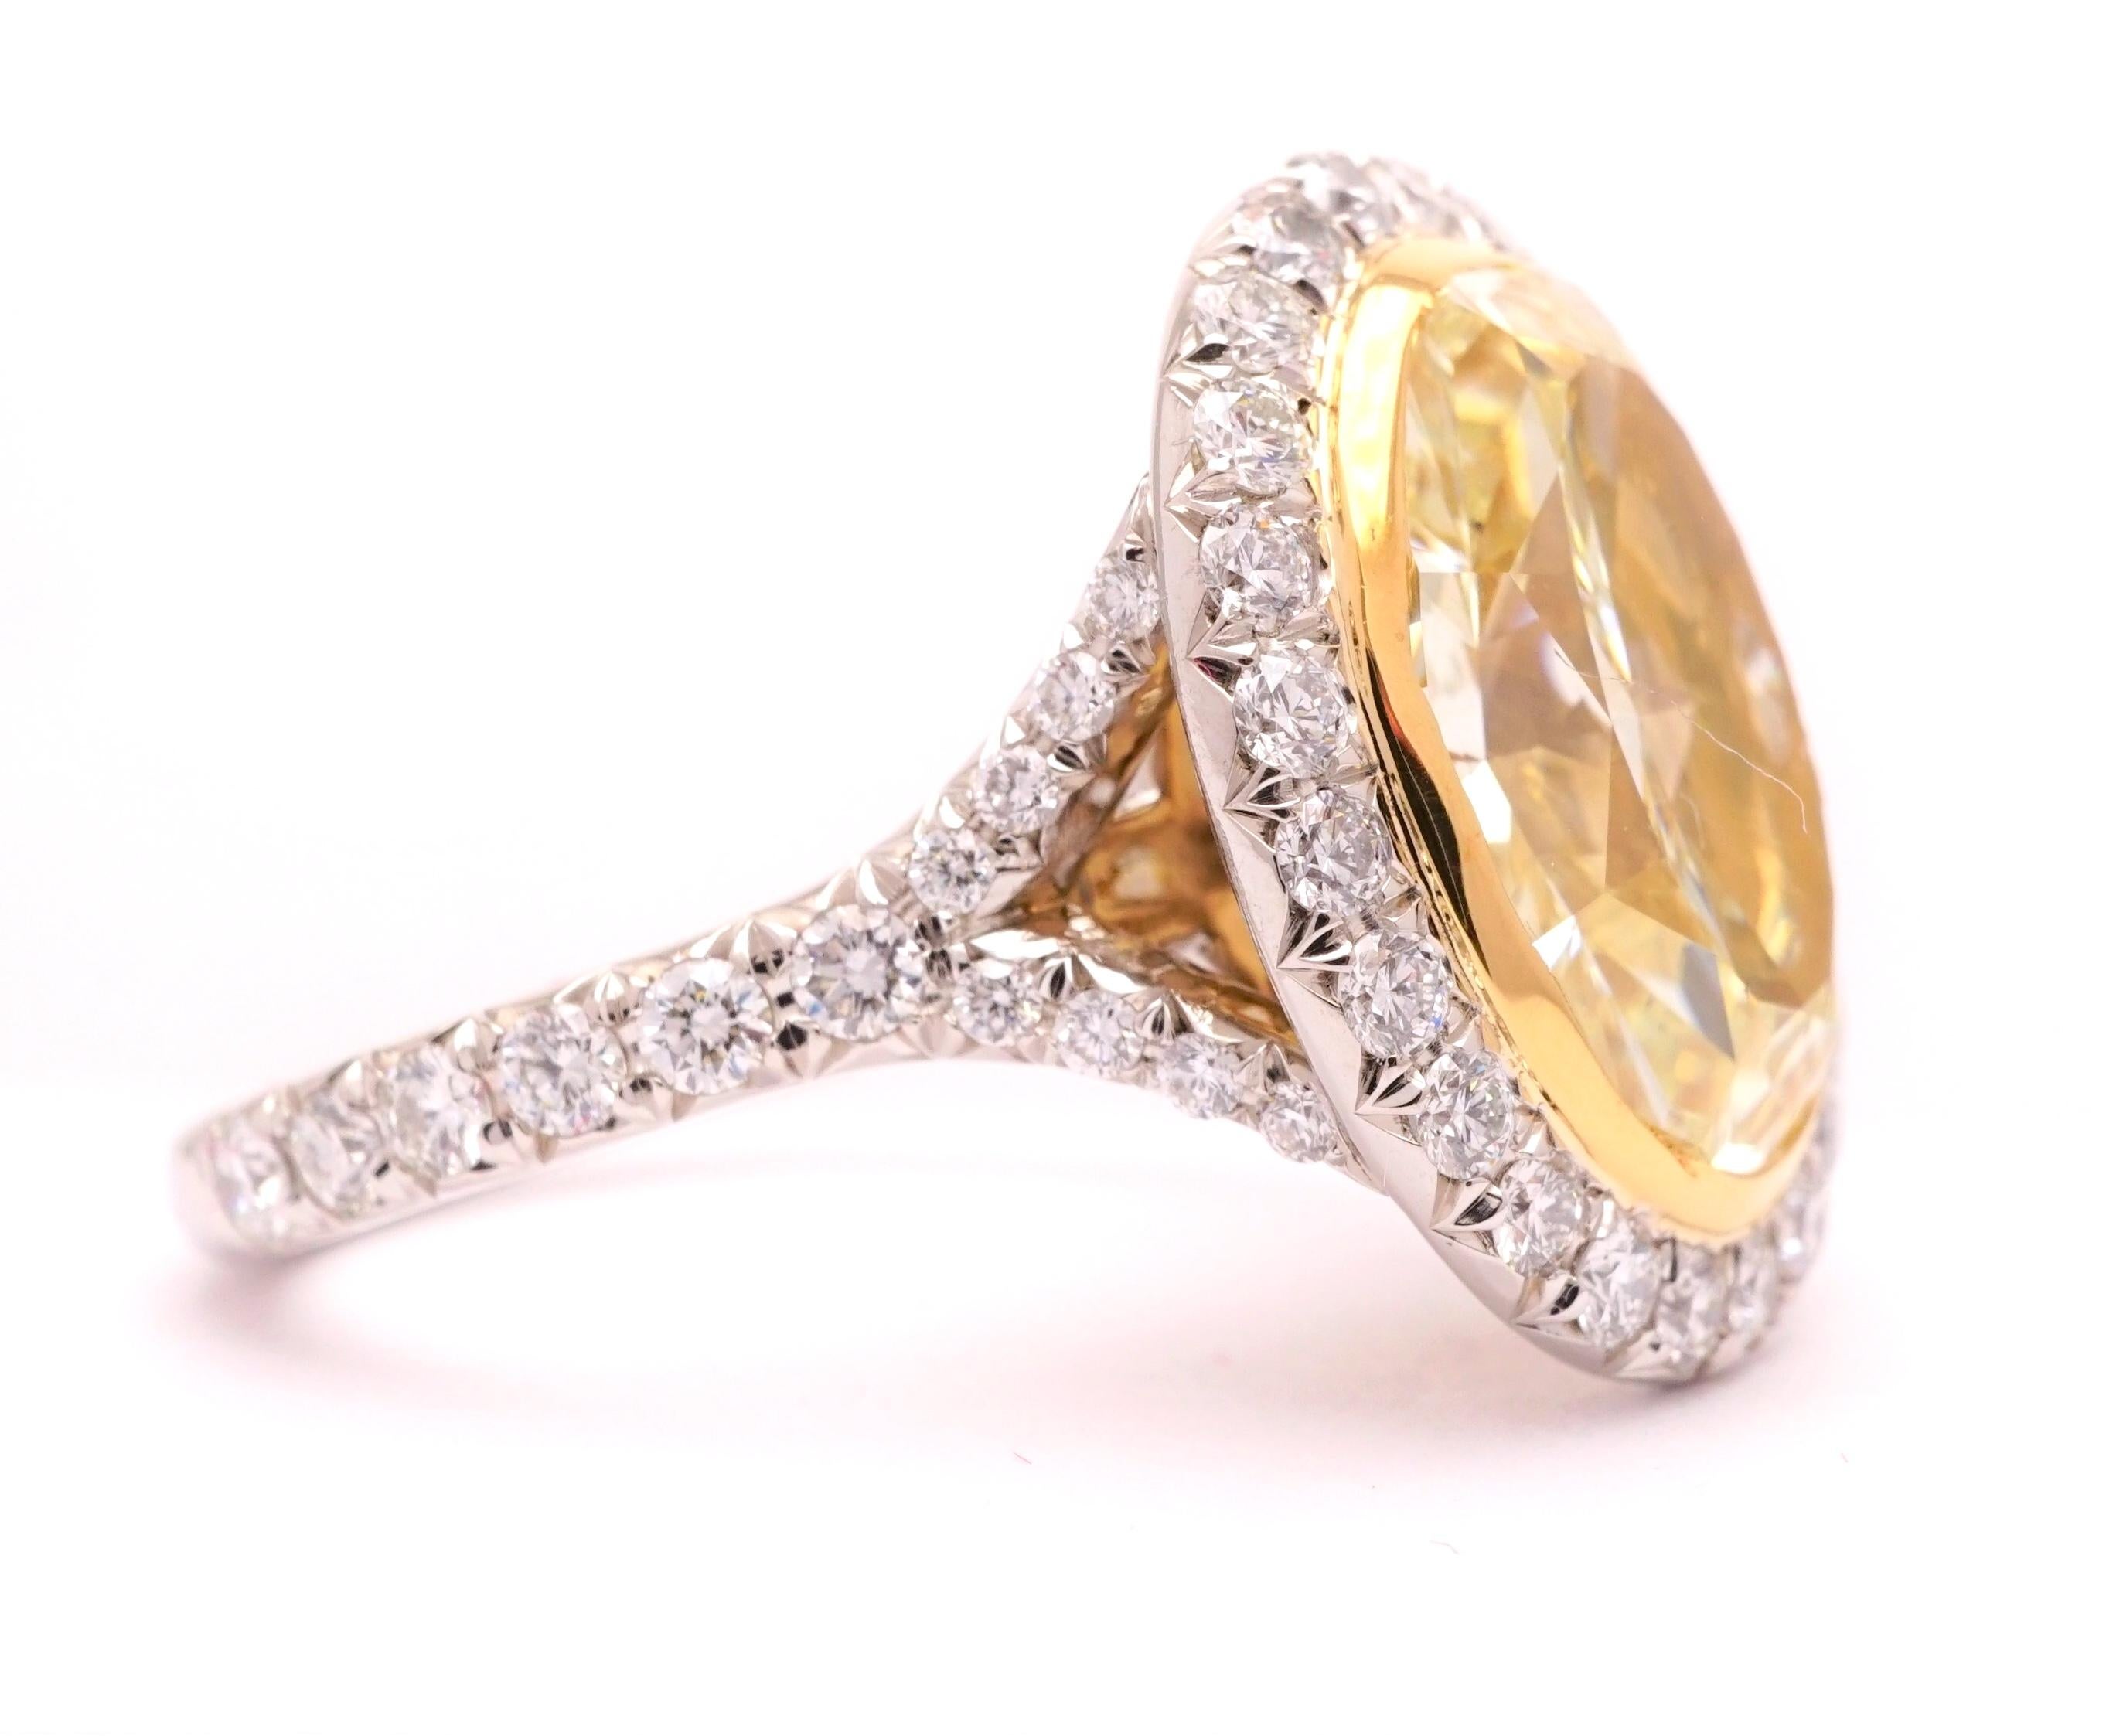 Oval Cut GIA Certified 5.12 Ct Fancy Yellow Oval Diamond Engagement Ring in Platinum